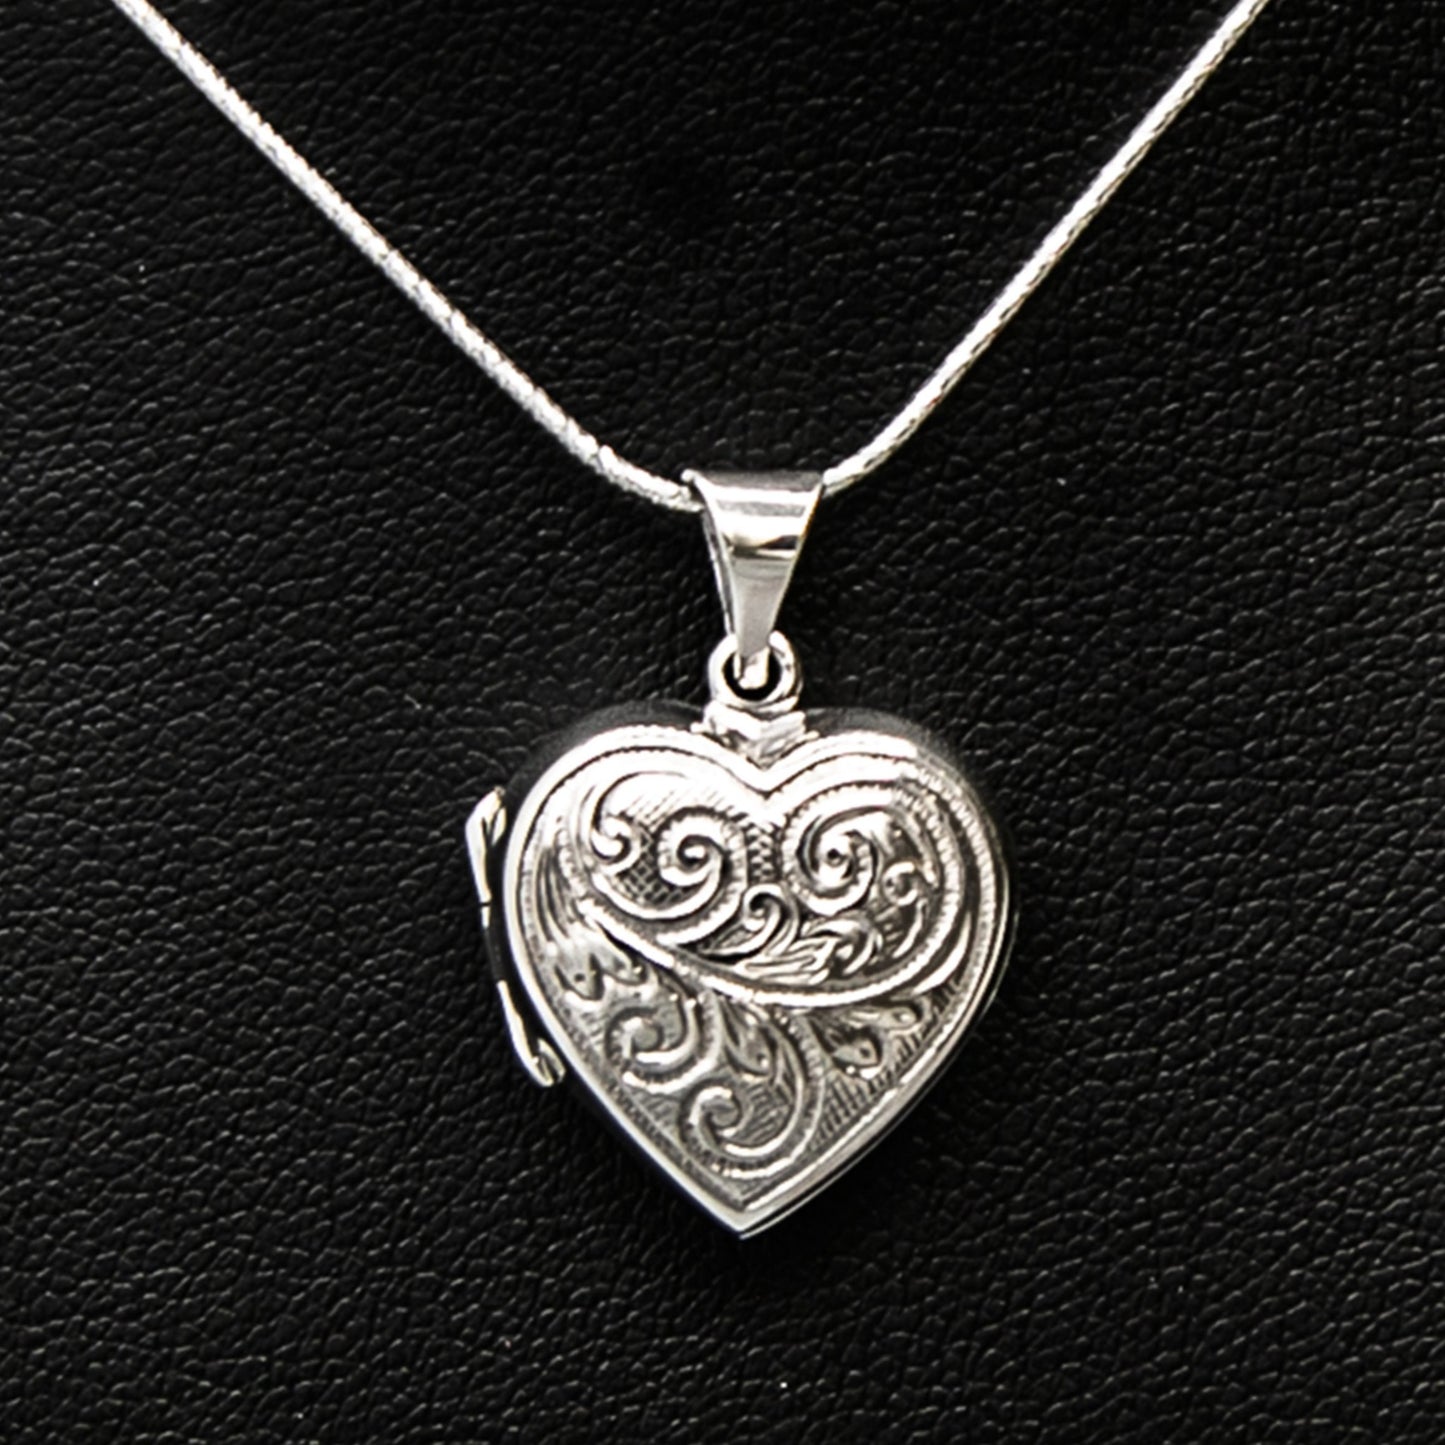 Silver heart-shaped photo locket pendant with embellishment on silver chain displayed on black